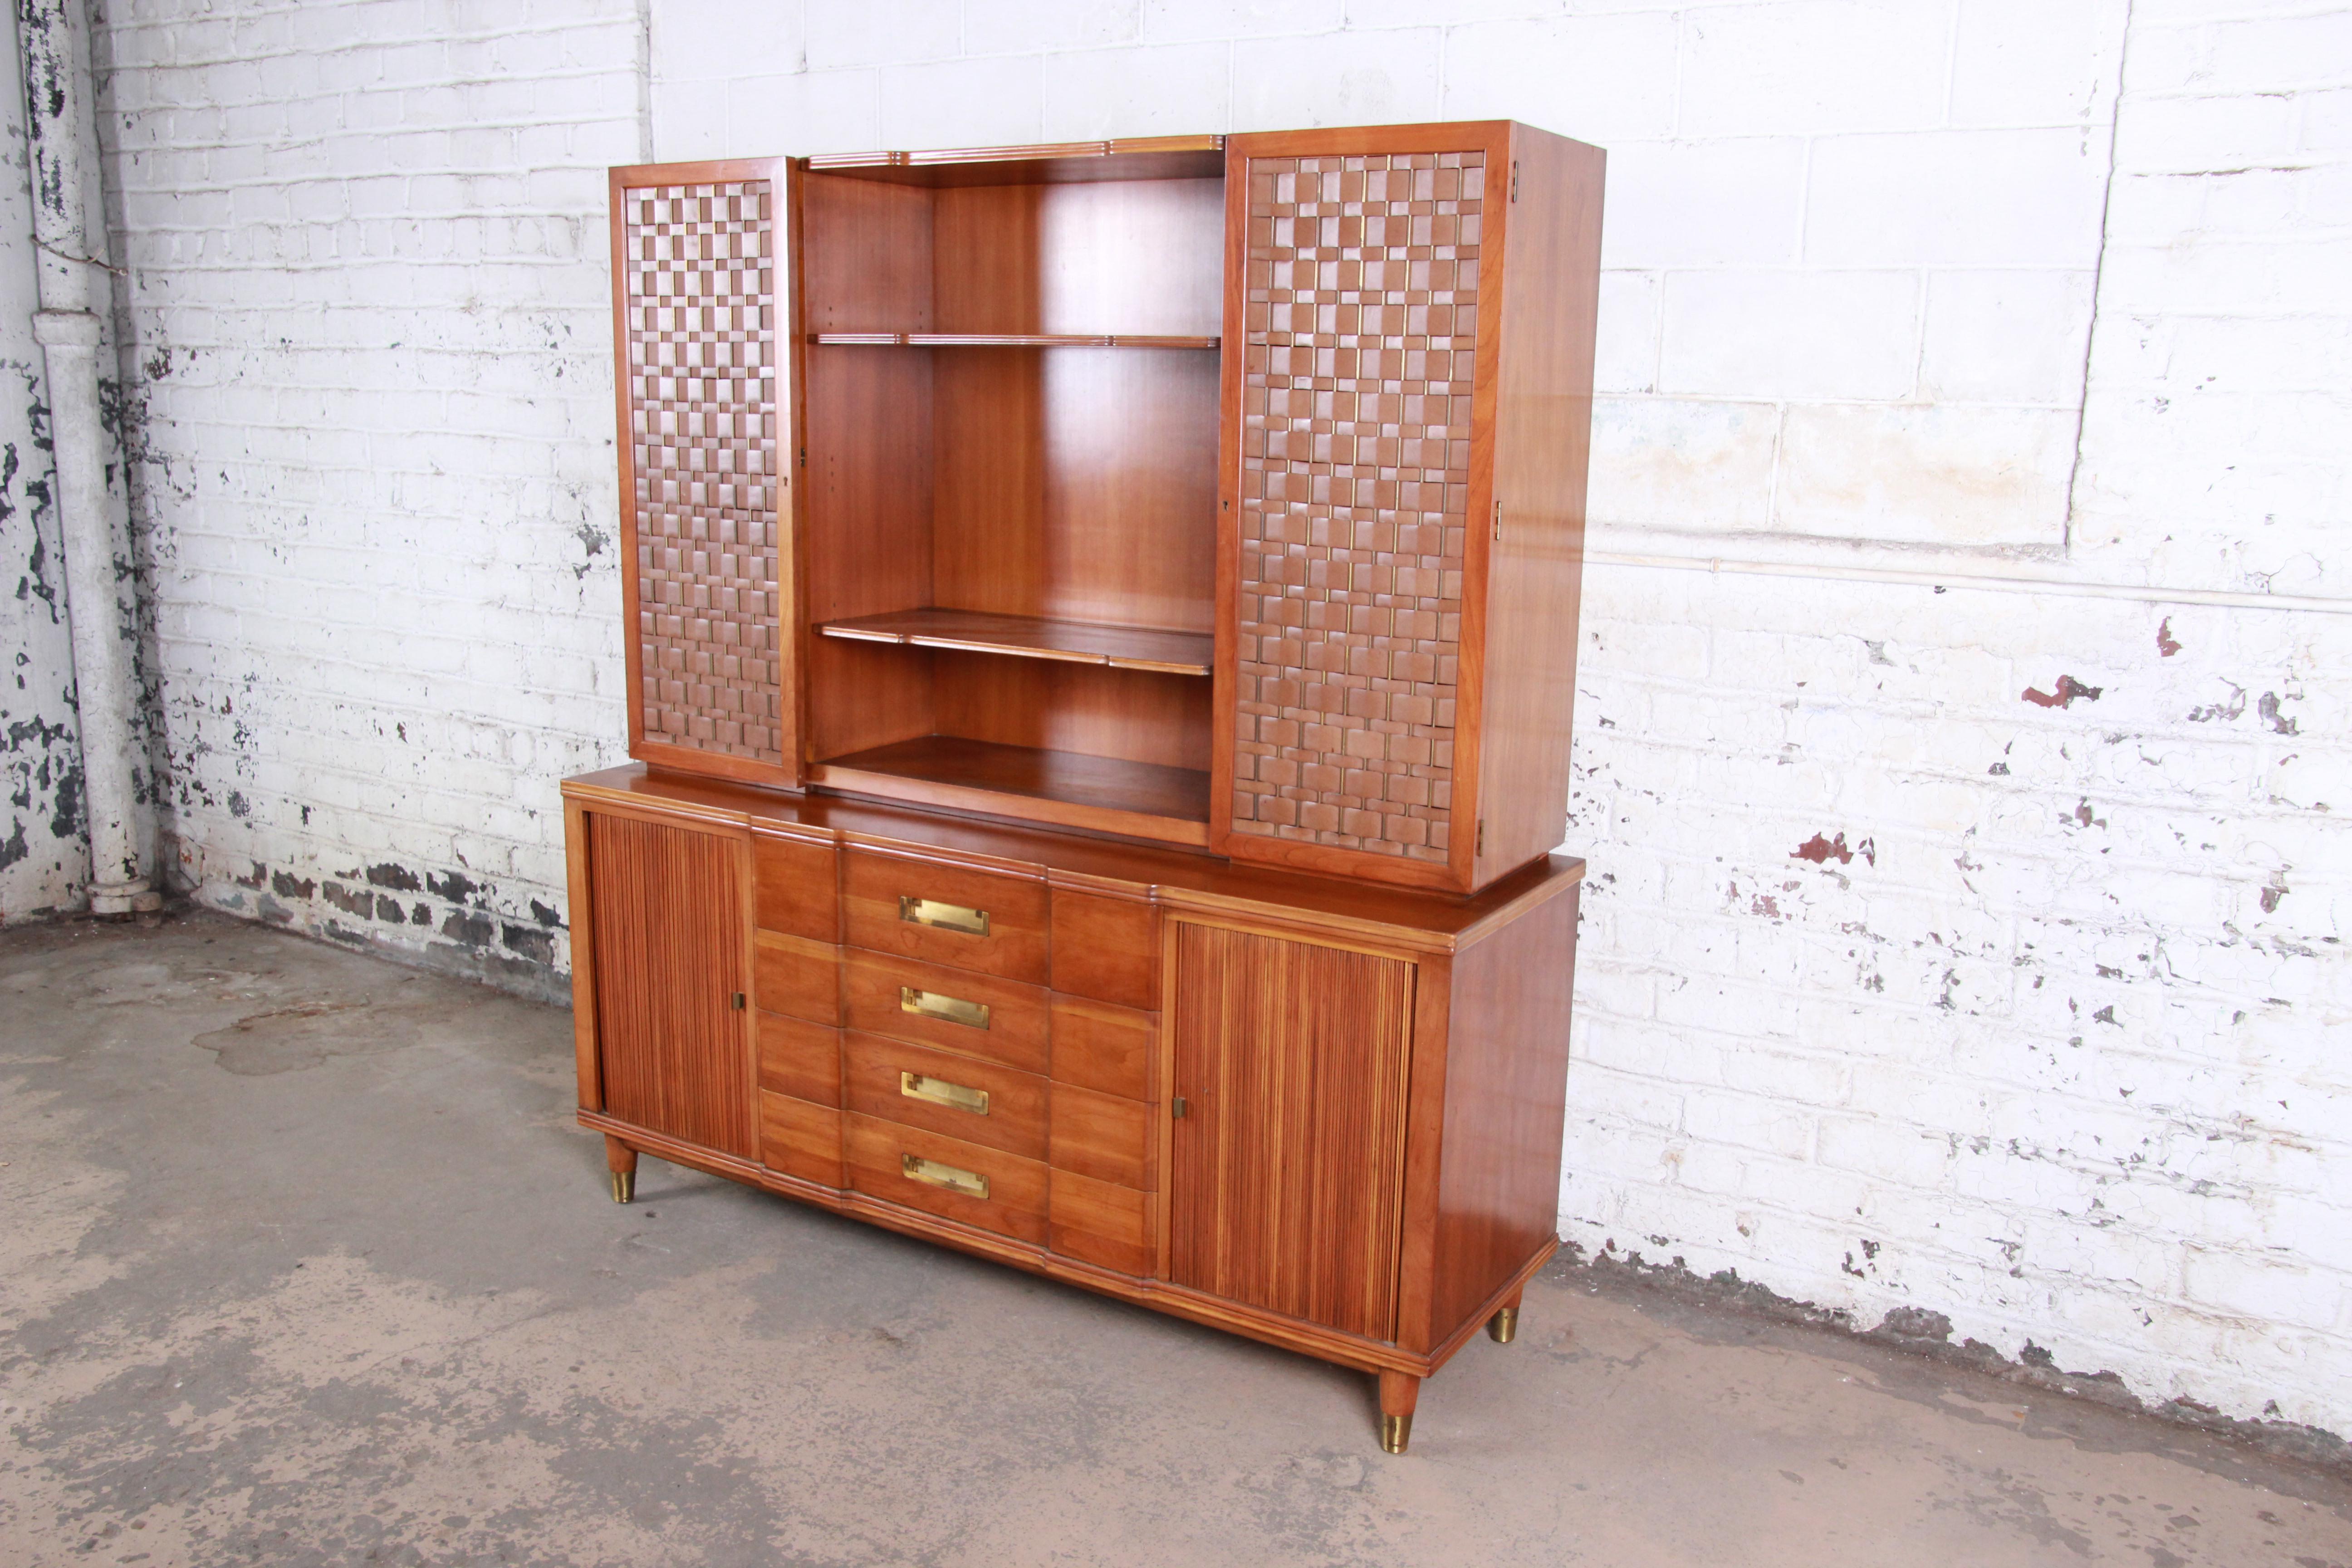 An exceptional Mid-Century Modern sideboard credenza with hutch top by John Widdicomb of Grand Rapids. The sideboard features solid cherrywood construction and a hutch top with unique woven leather and brass doors. It offers ample storage, the lower